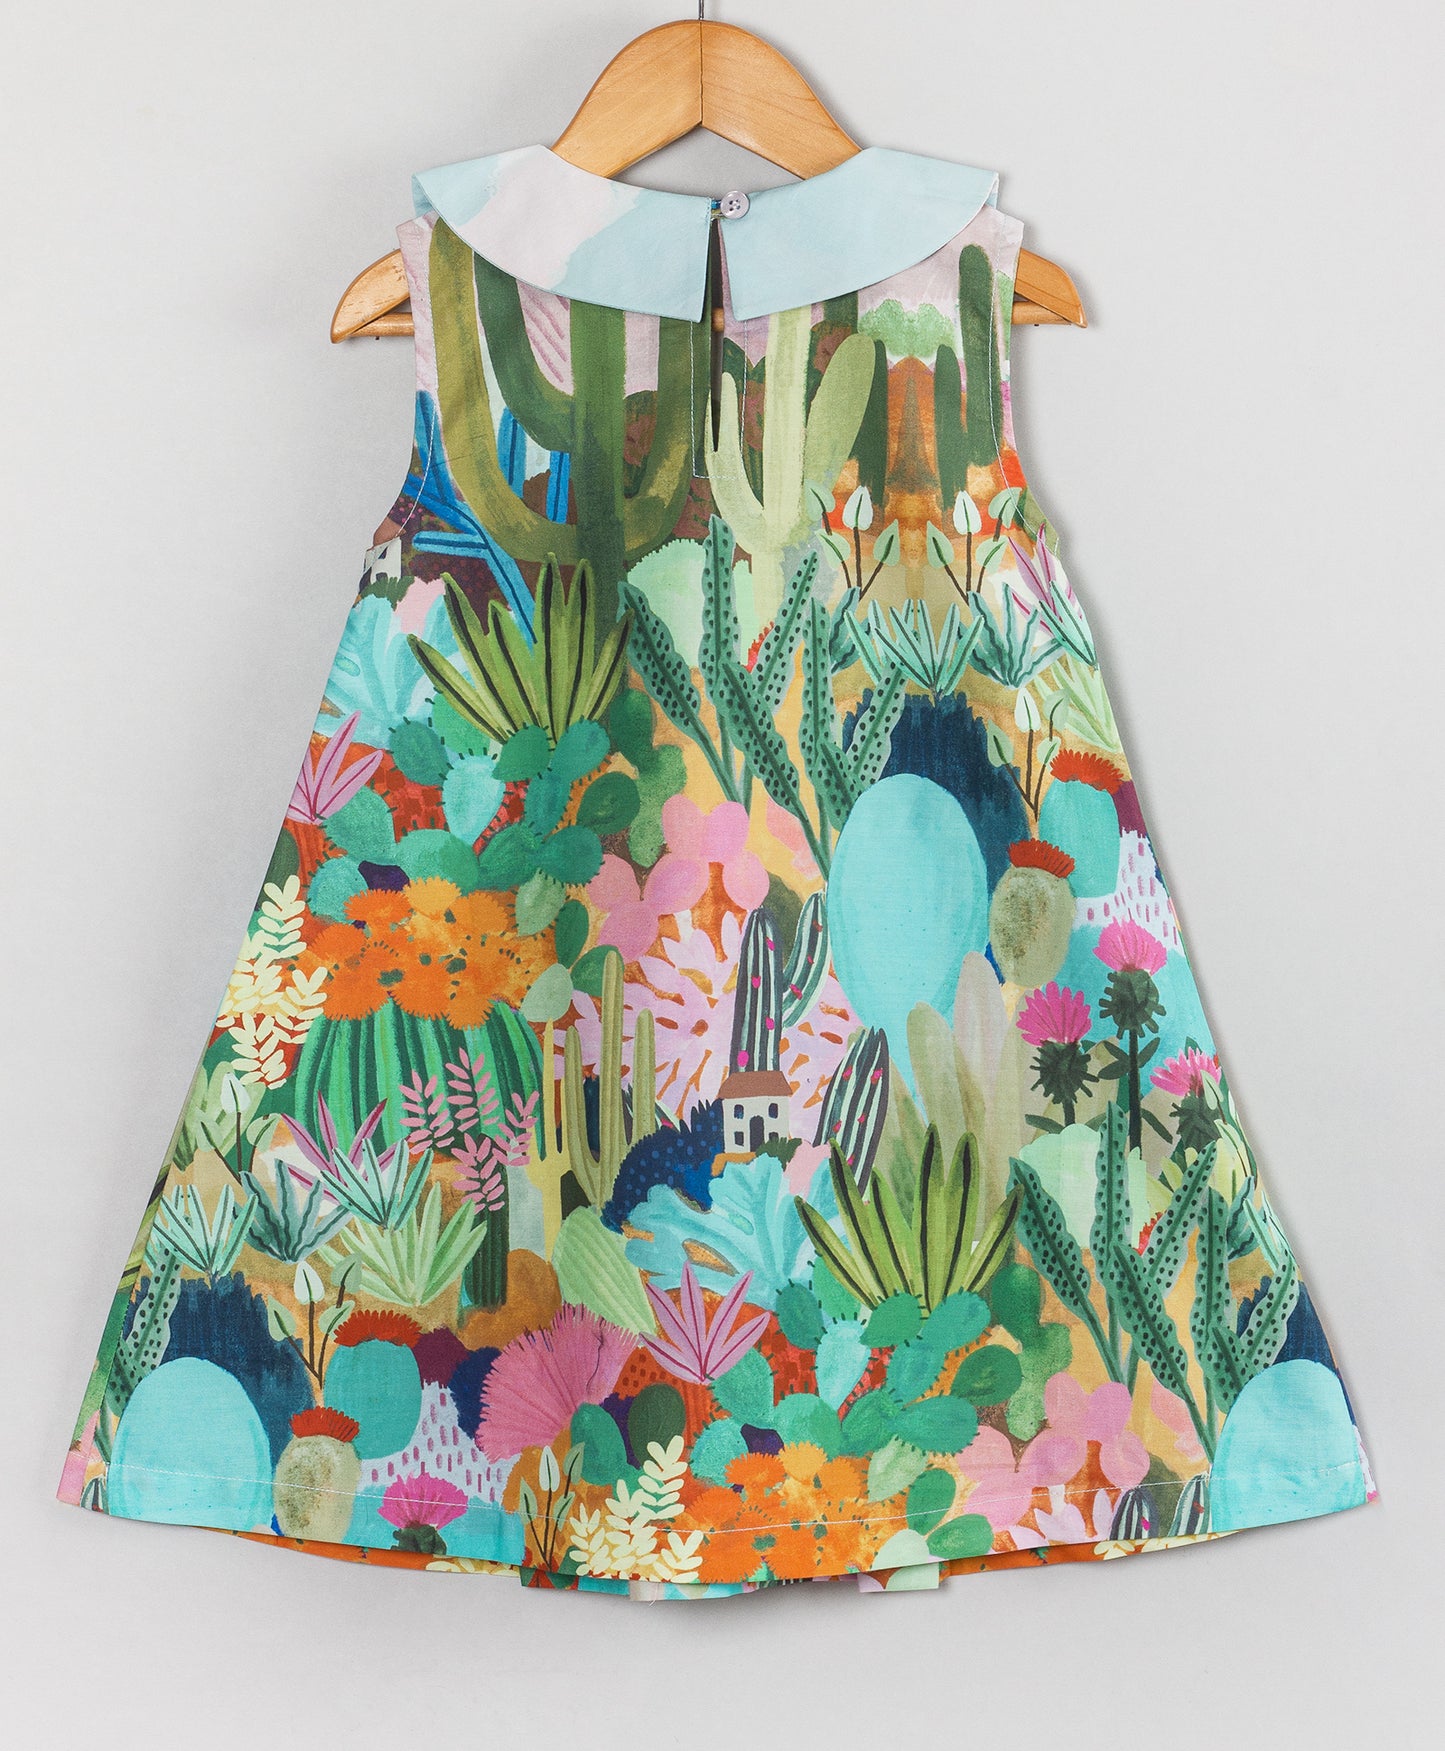 FLORAL PRINT DRESS WITH PETERPAN COLLAR AND BOWS AT FRONT WAIST